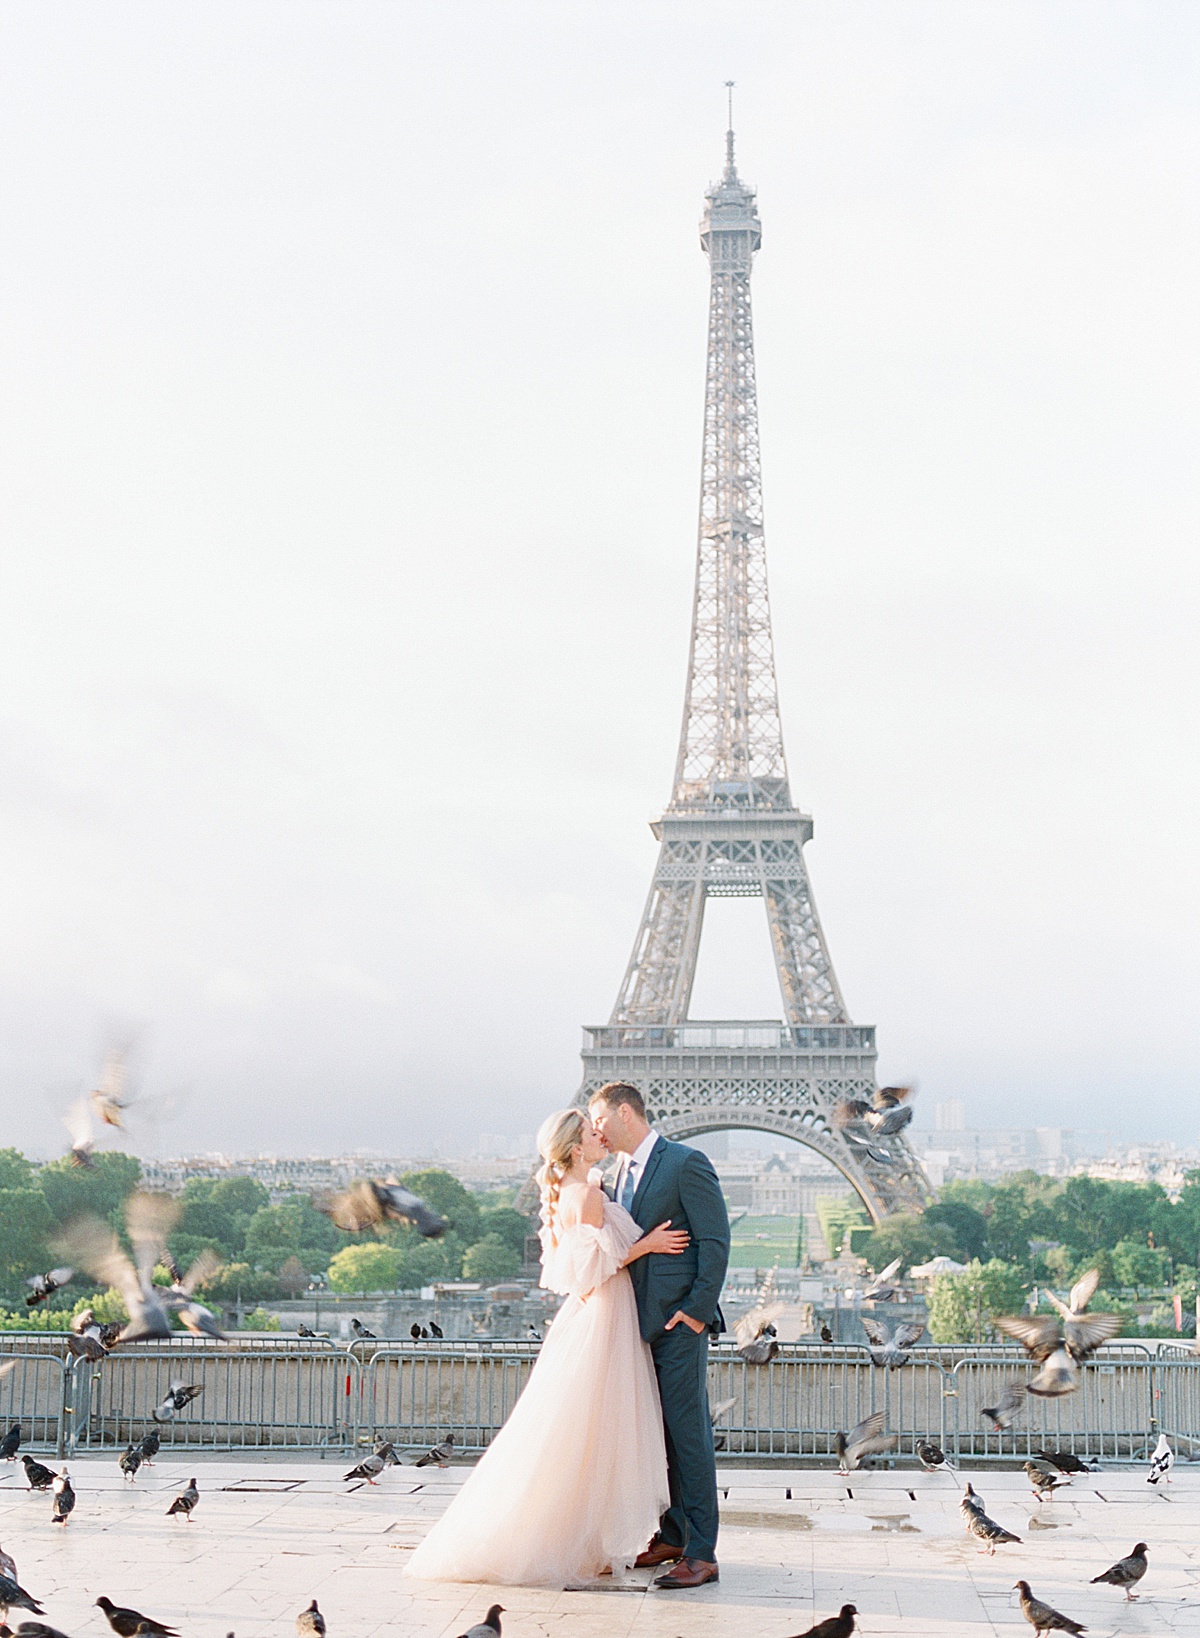 Eiffel Tower Wedding Bride and Groom Kissing with Birds Flying around Photo